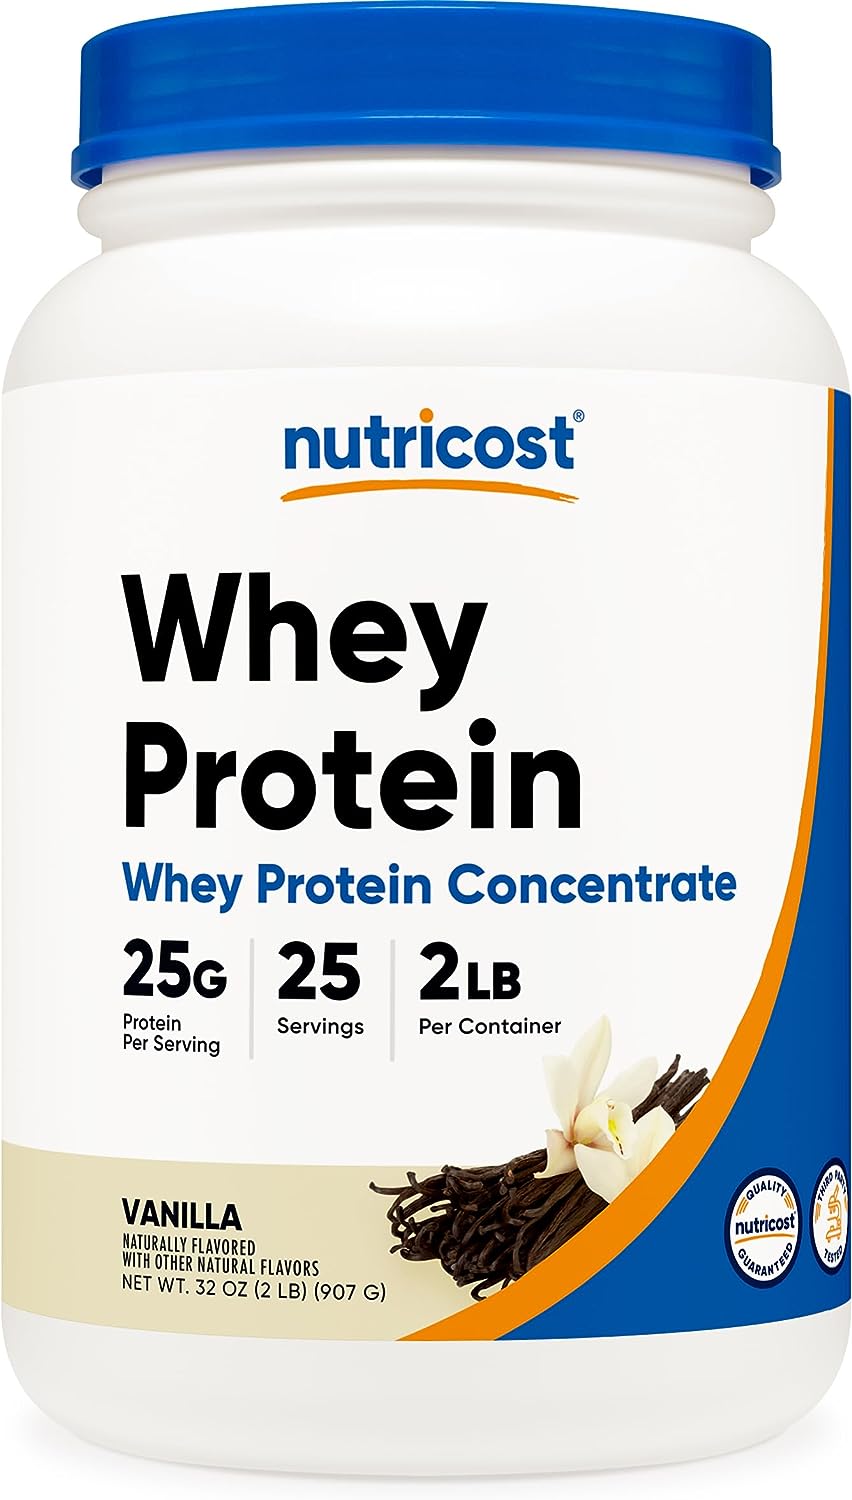 Nutricost Whey Protein Concentrate (Vanilla) 2S